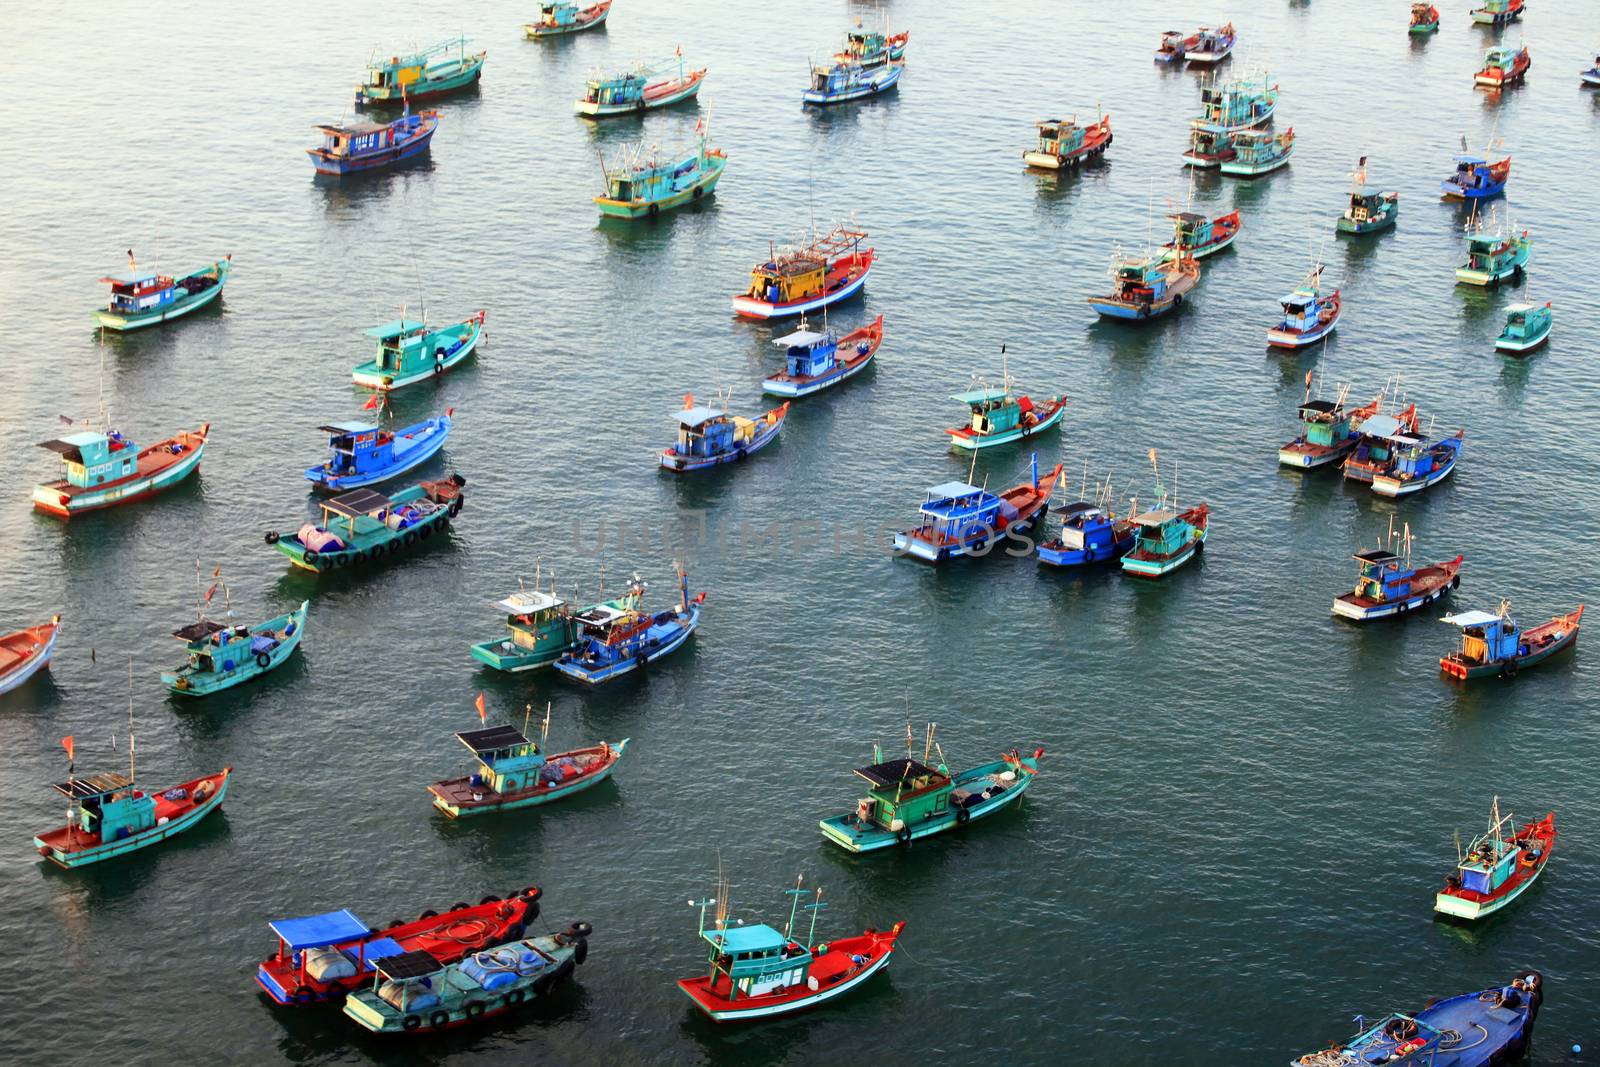 Aerial view of a group of boats at sea in Vietnam, Phu Quoc